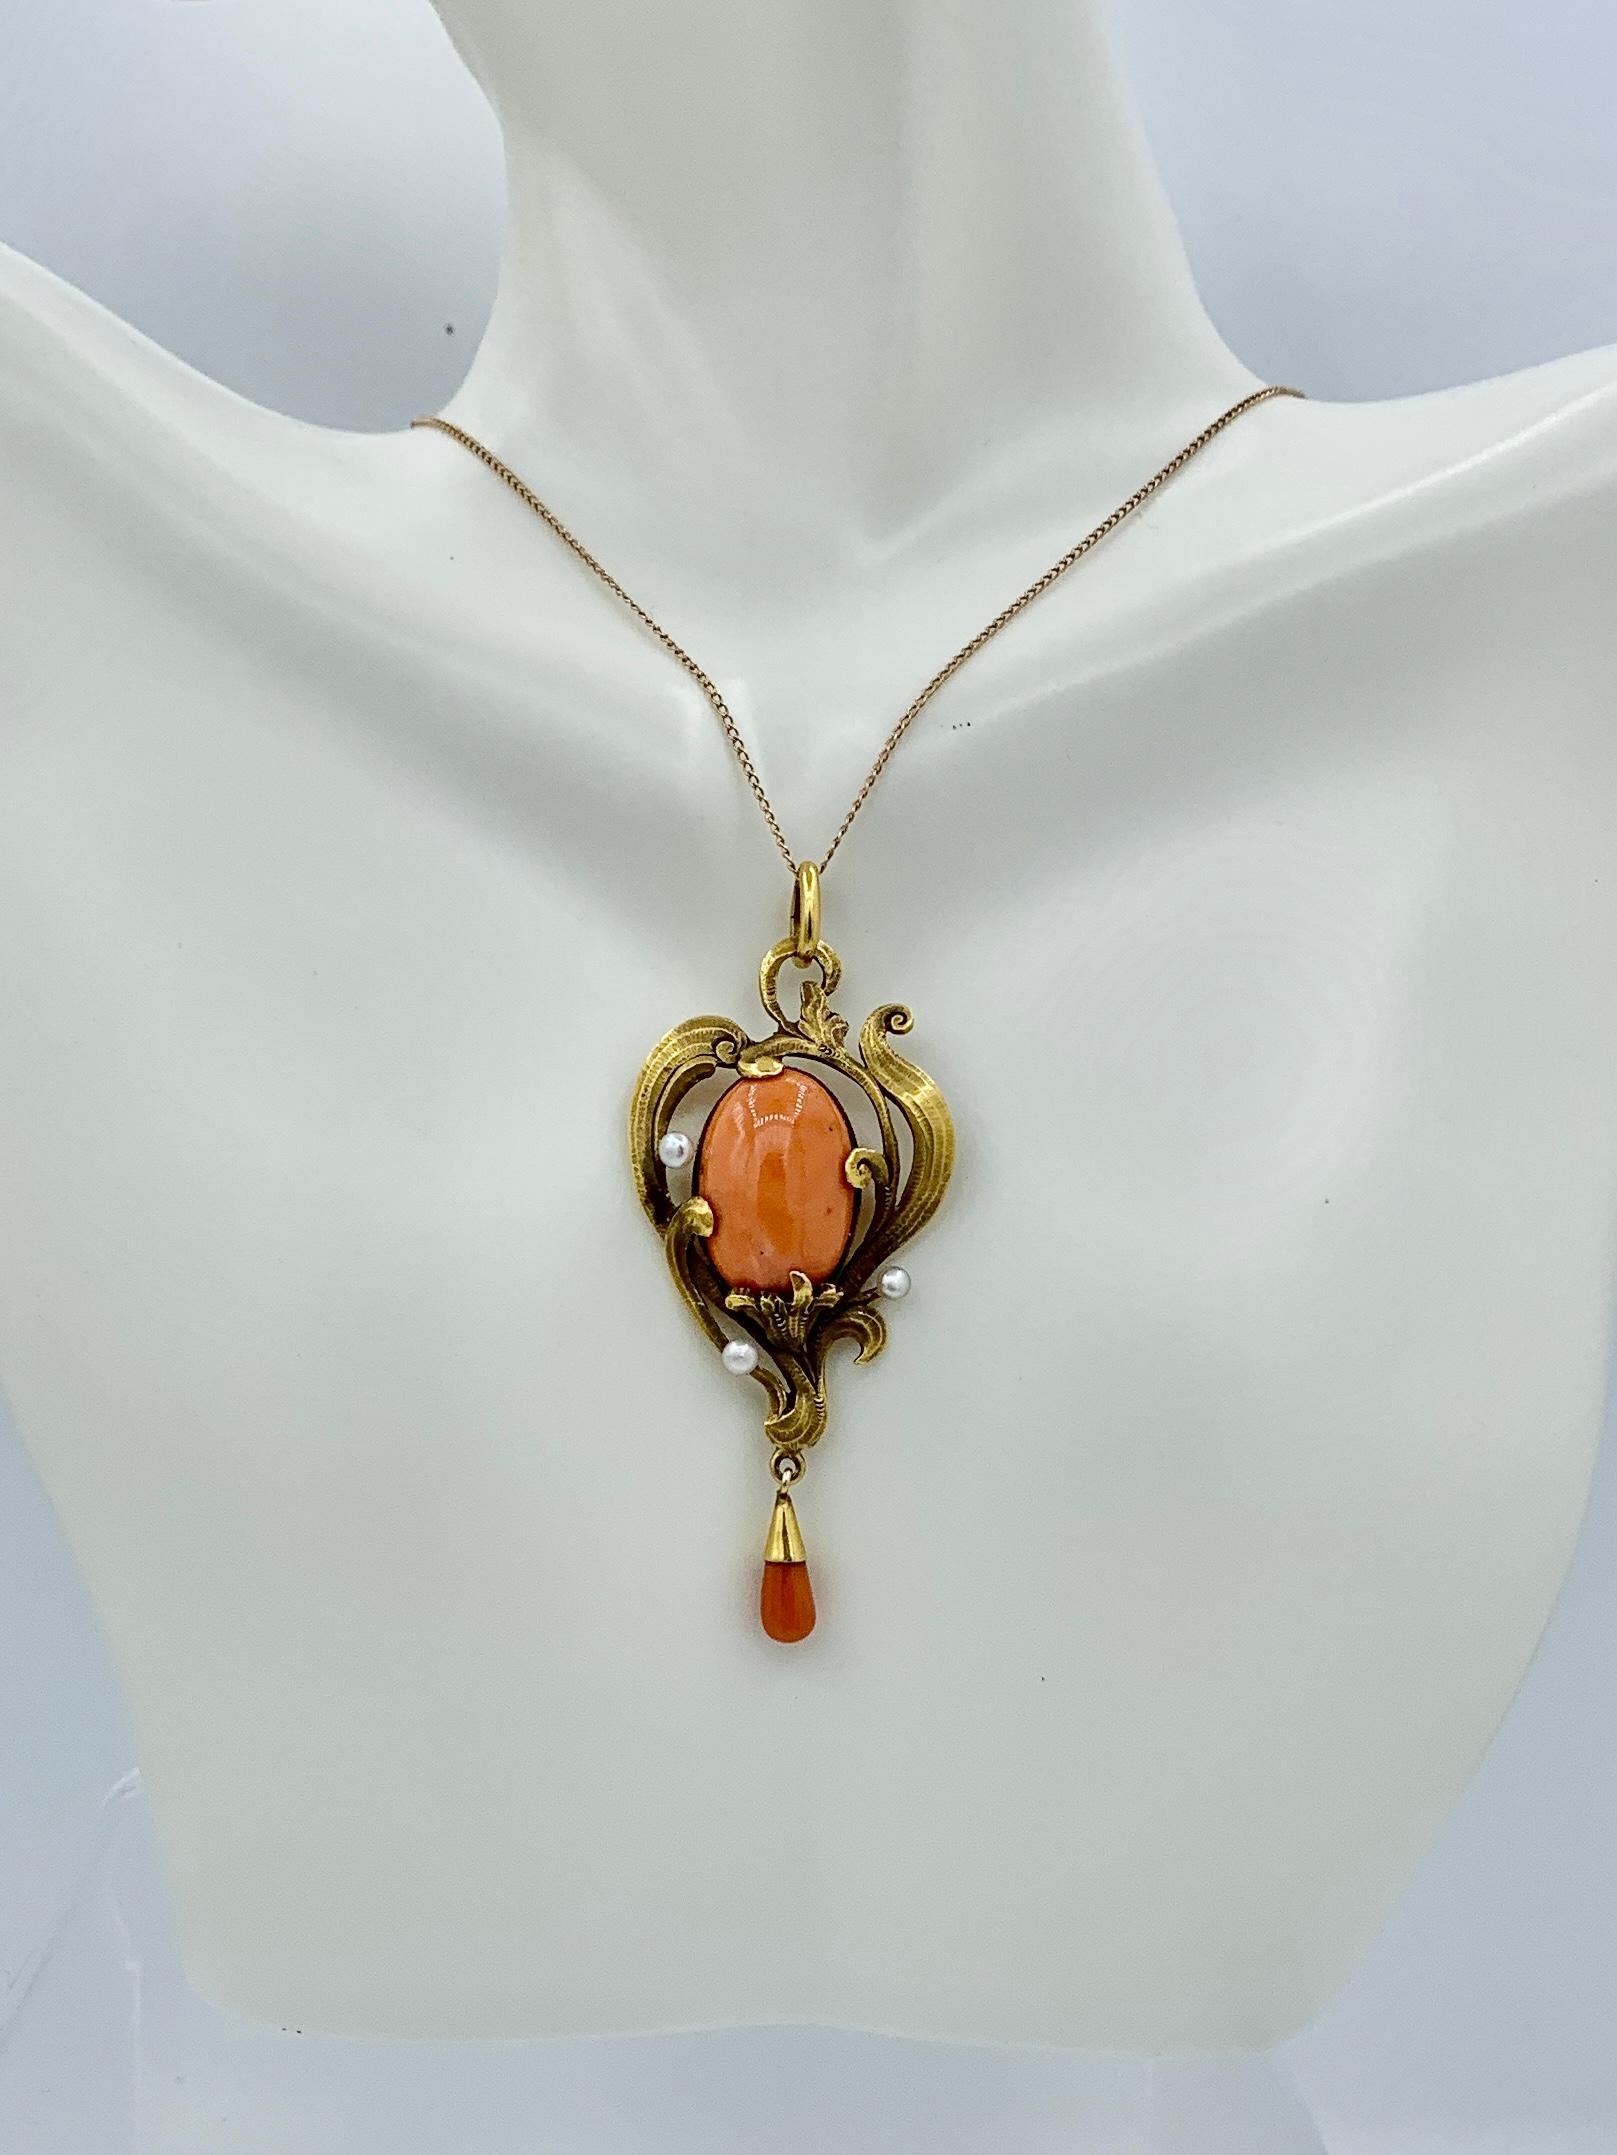 This is a stunning Museum Quality Antique Art Nouveau Coral and Pearl Pendant in an exquisite flower motif in 18 Karat Gold.  The magnificent coral Pendant dates to the Belle Epoque - Art Nouveau period, circa 1880 - 1915.  In the center is a